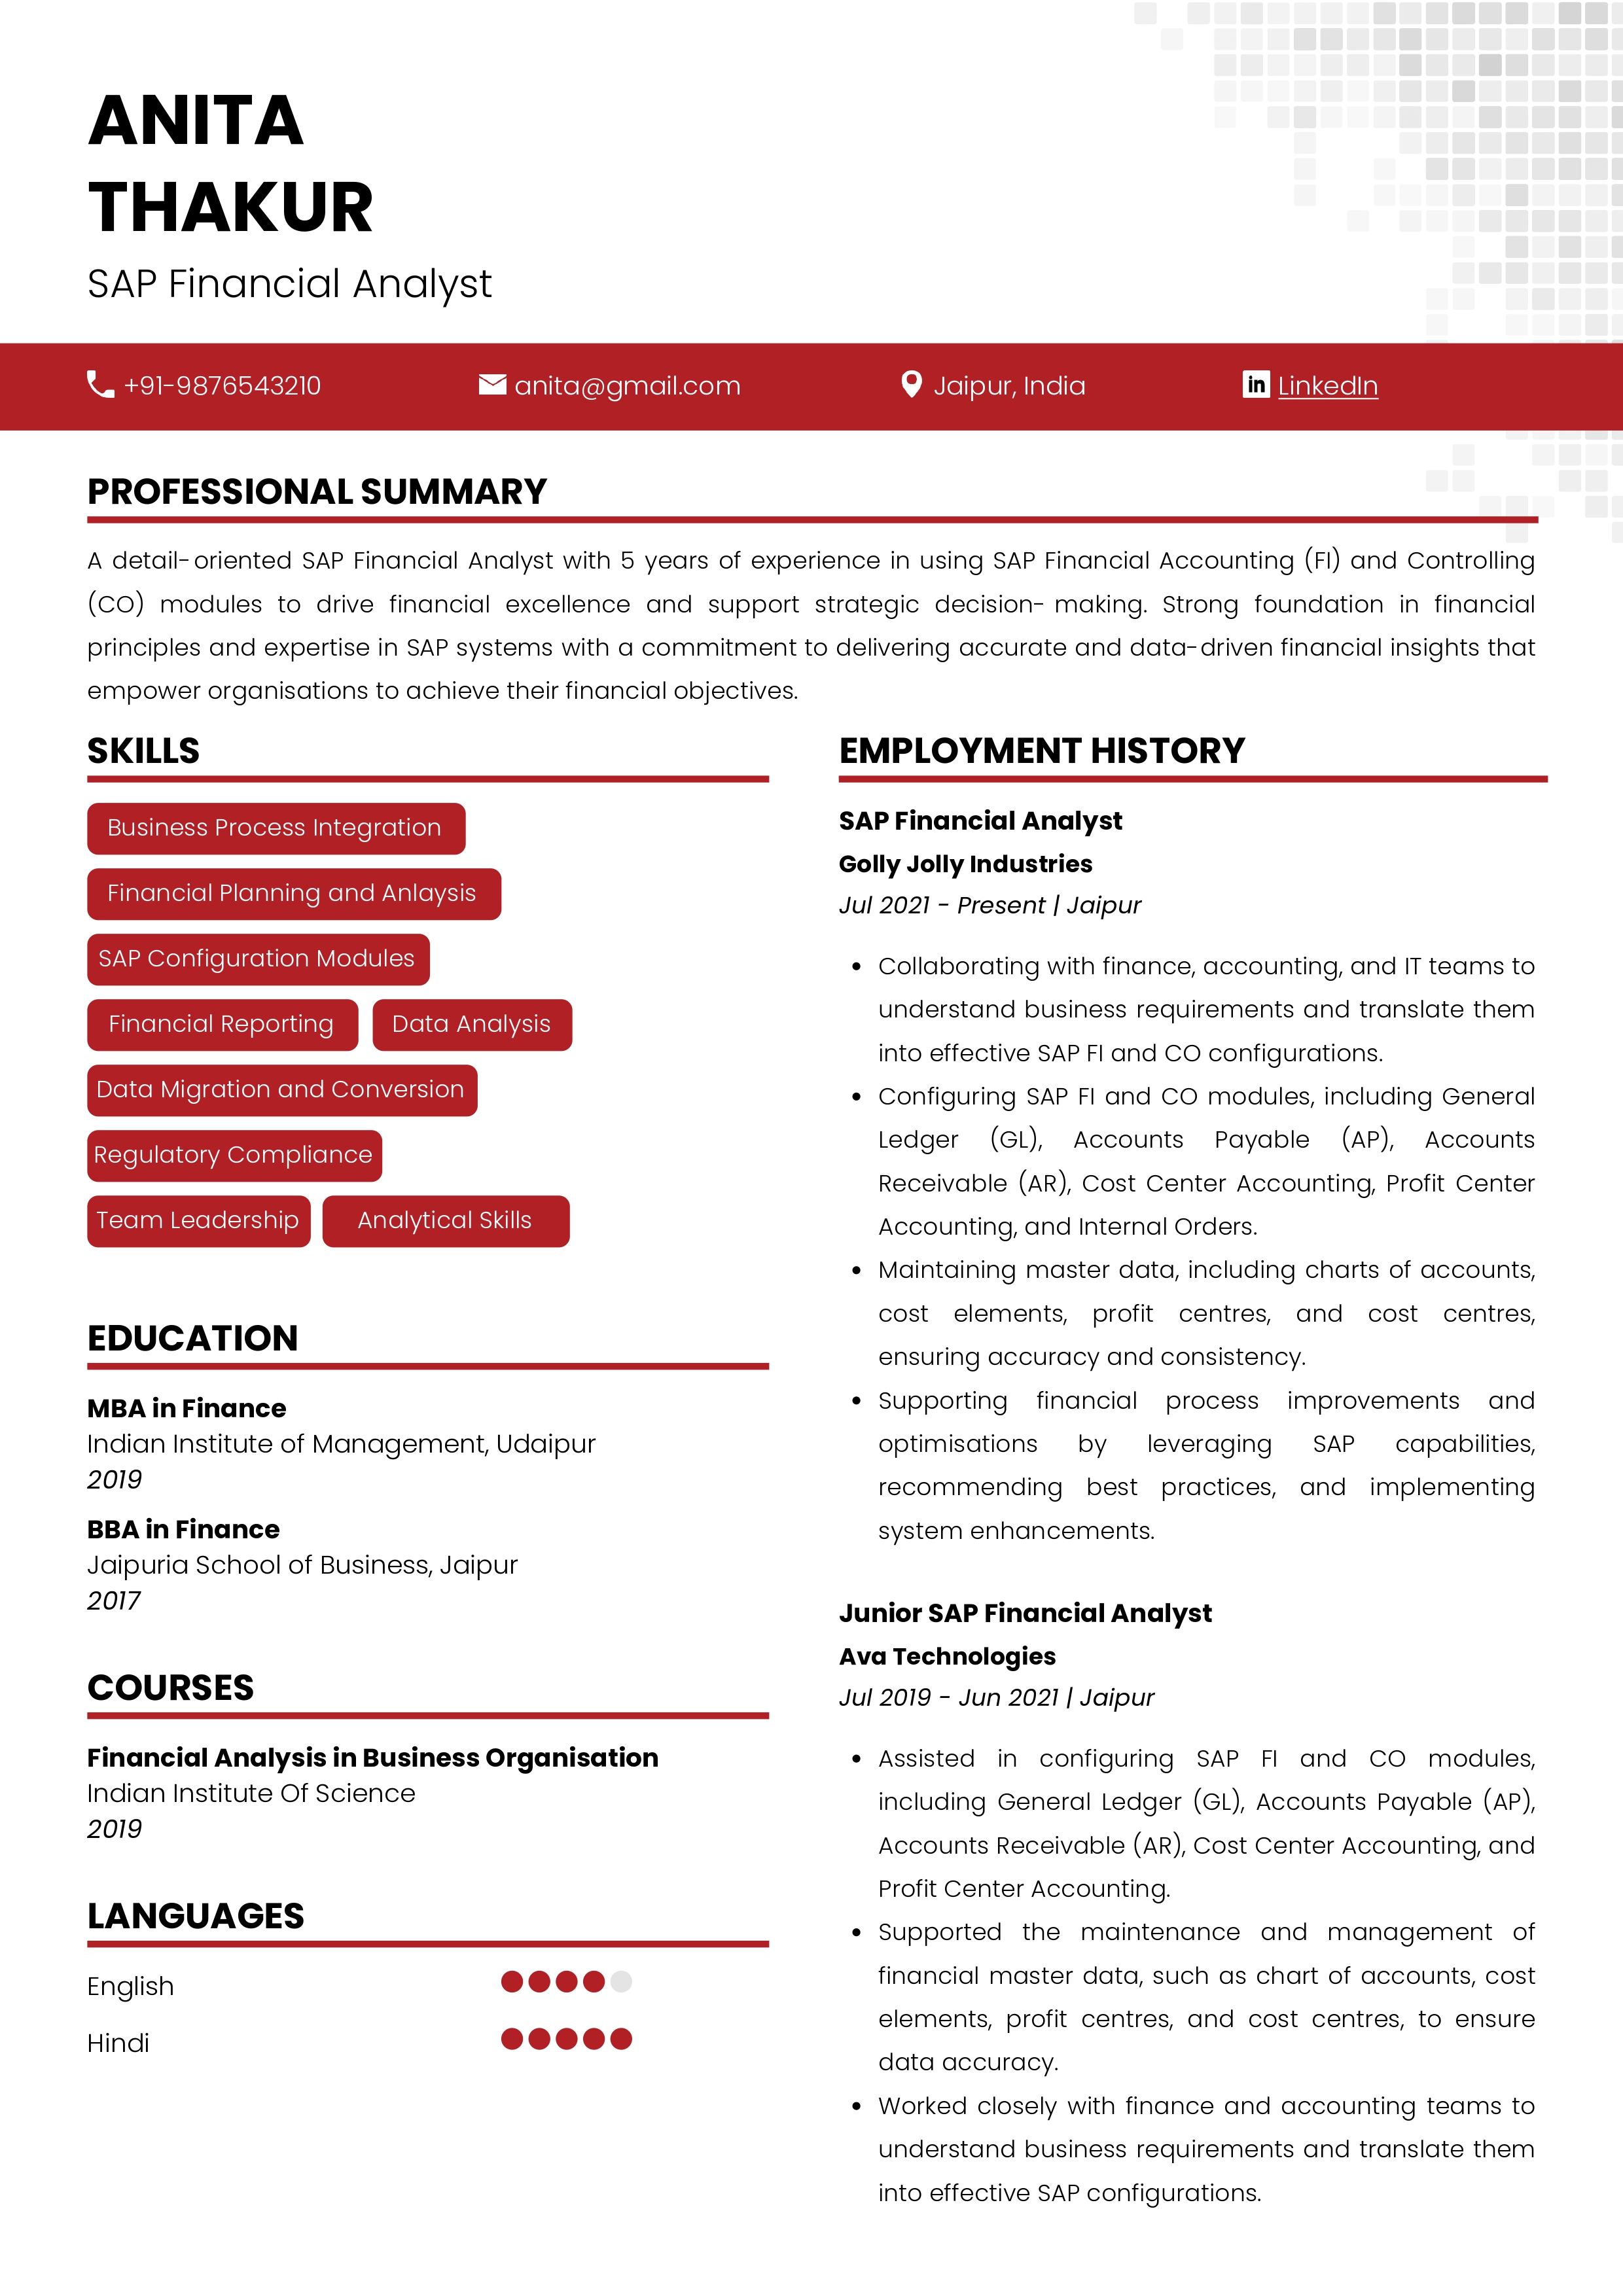 Sample Resume of SAP Financial Analyst | Free Resume Templates & Samples on Resumod.co